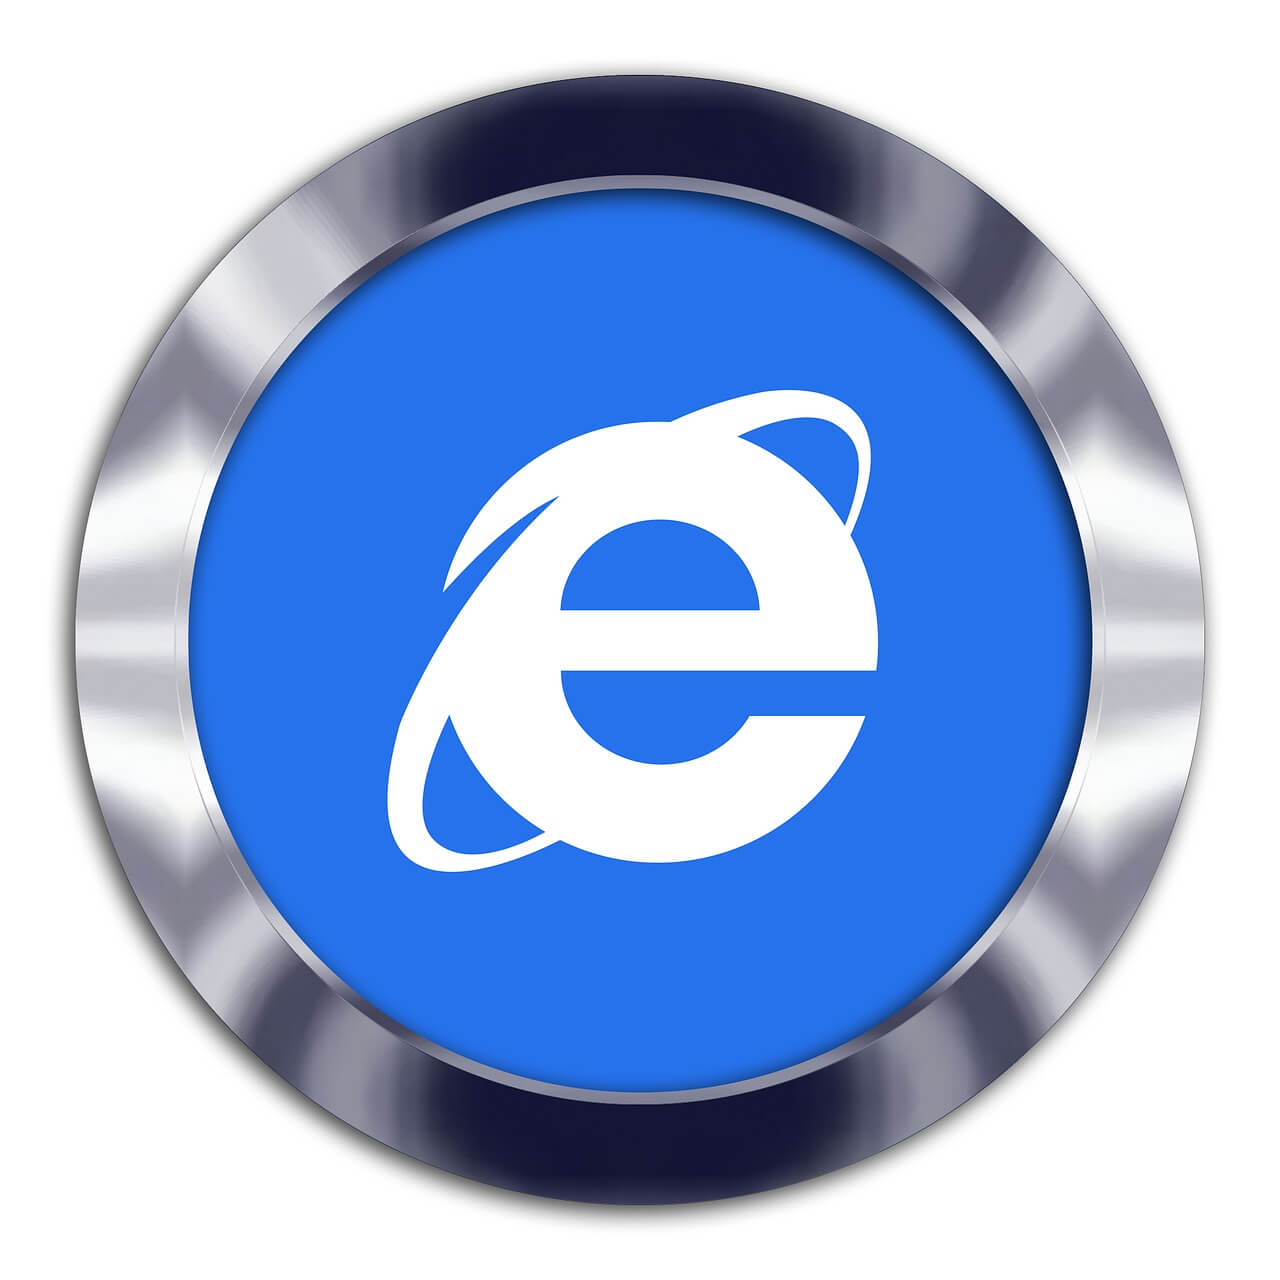 Chromium Edge for macOS supports IE mode